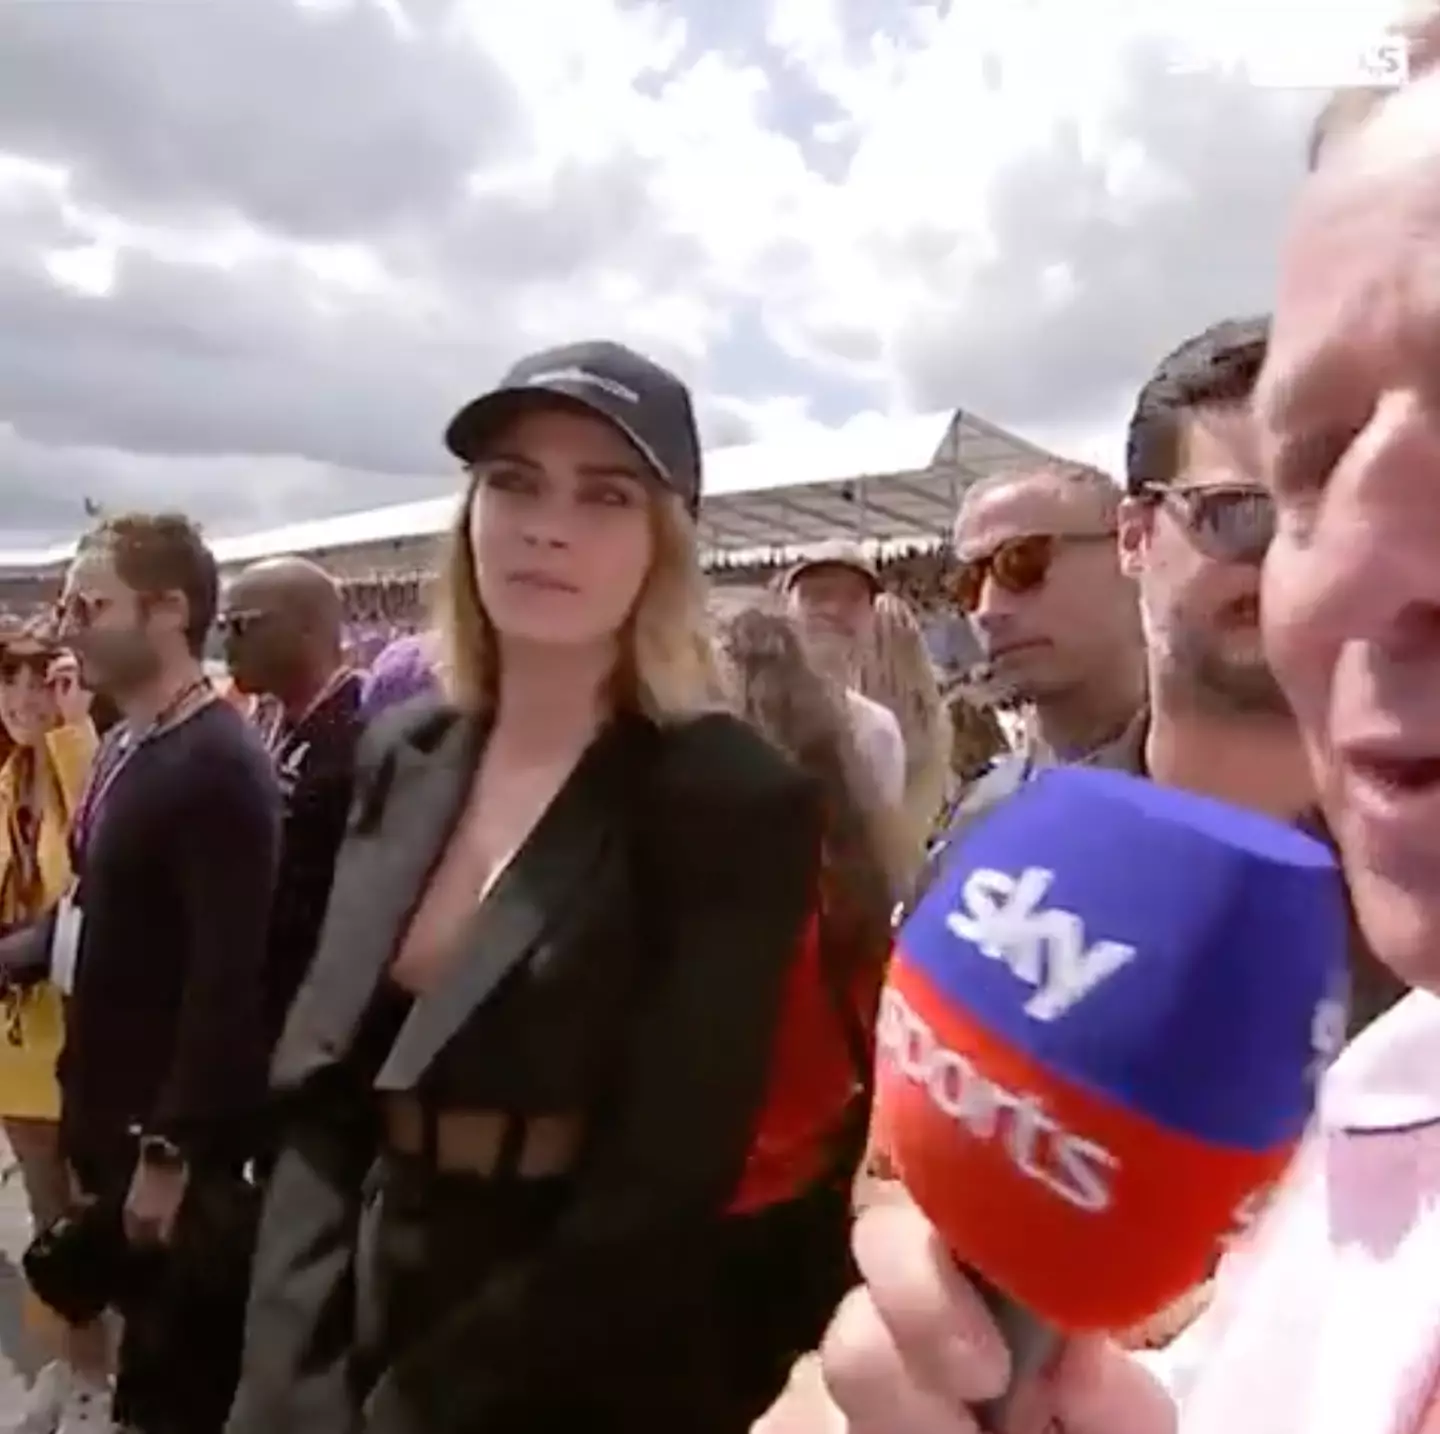 The model looked less impressed with the F1 interviewer.